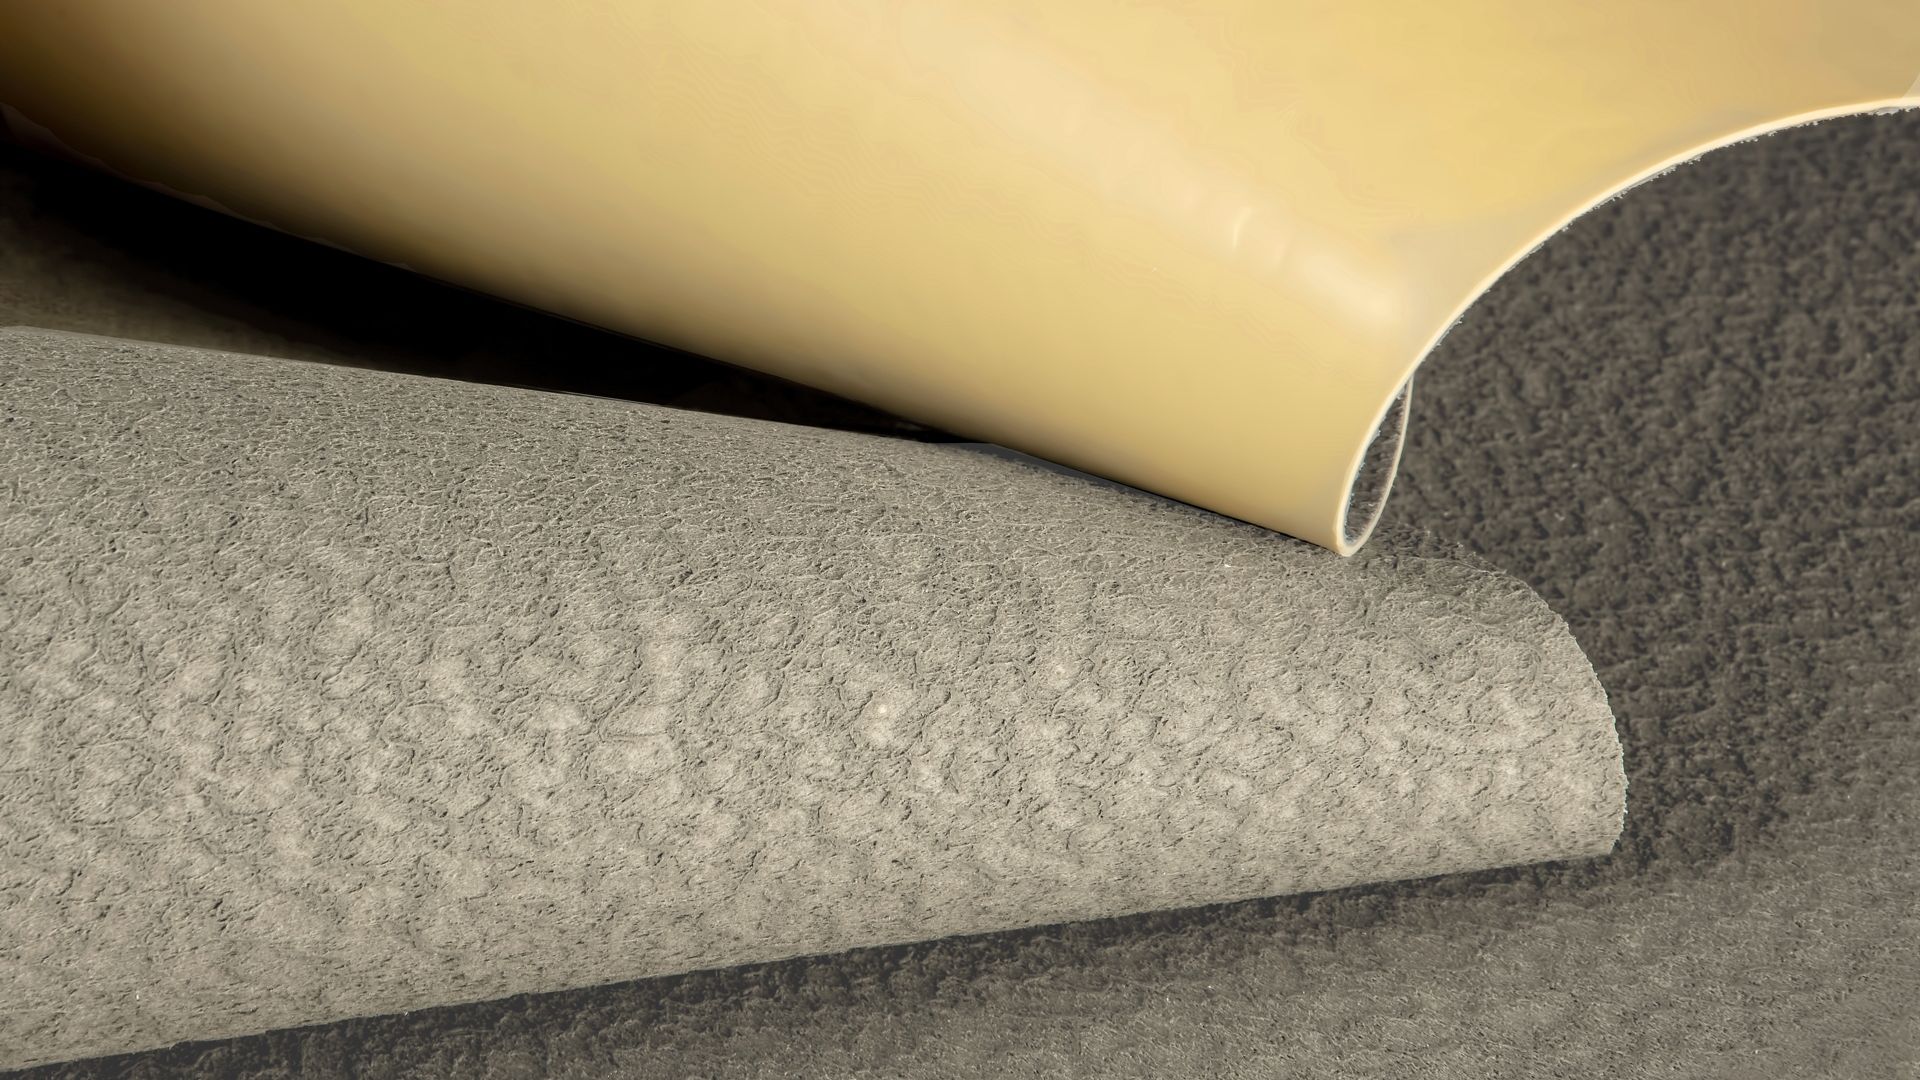 SikaProof® A+ waterproofing membrane folded to show yellow surface